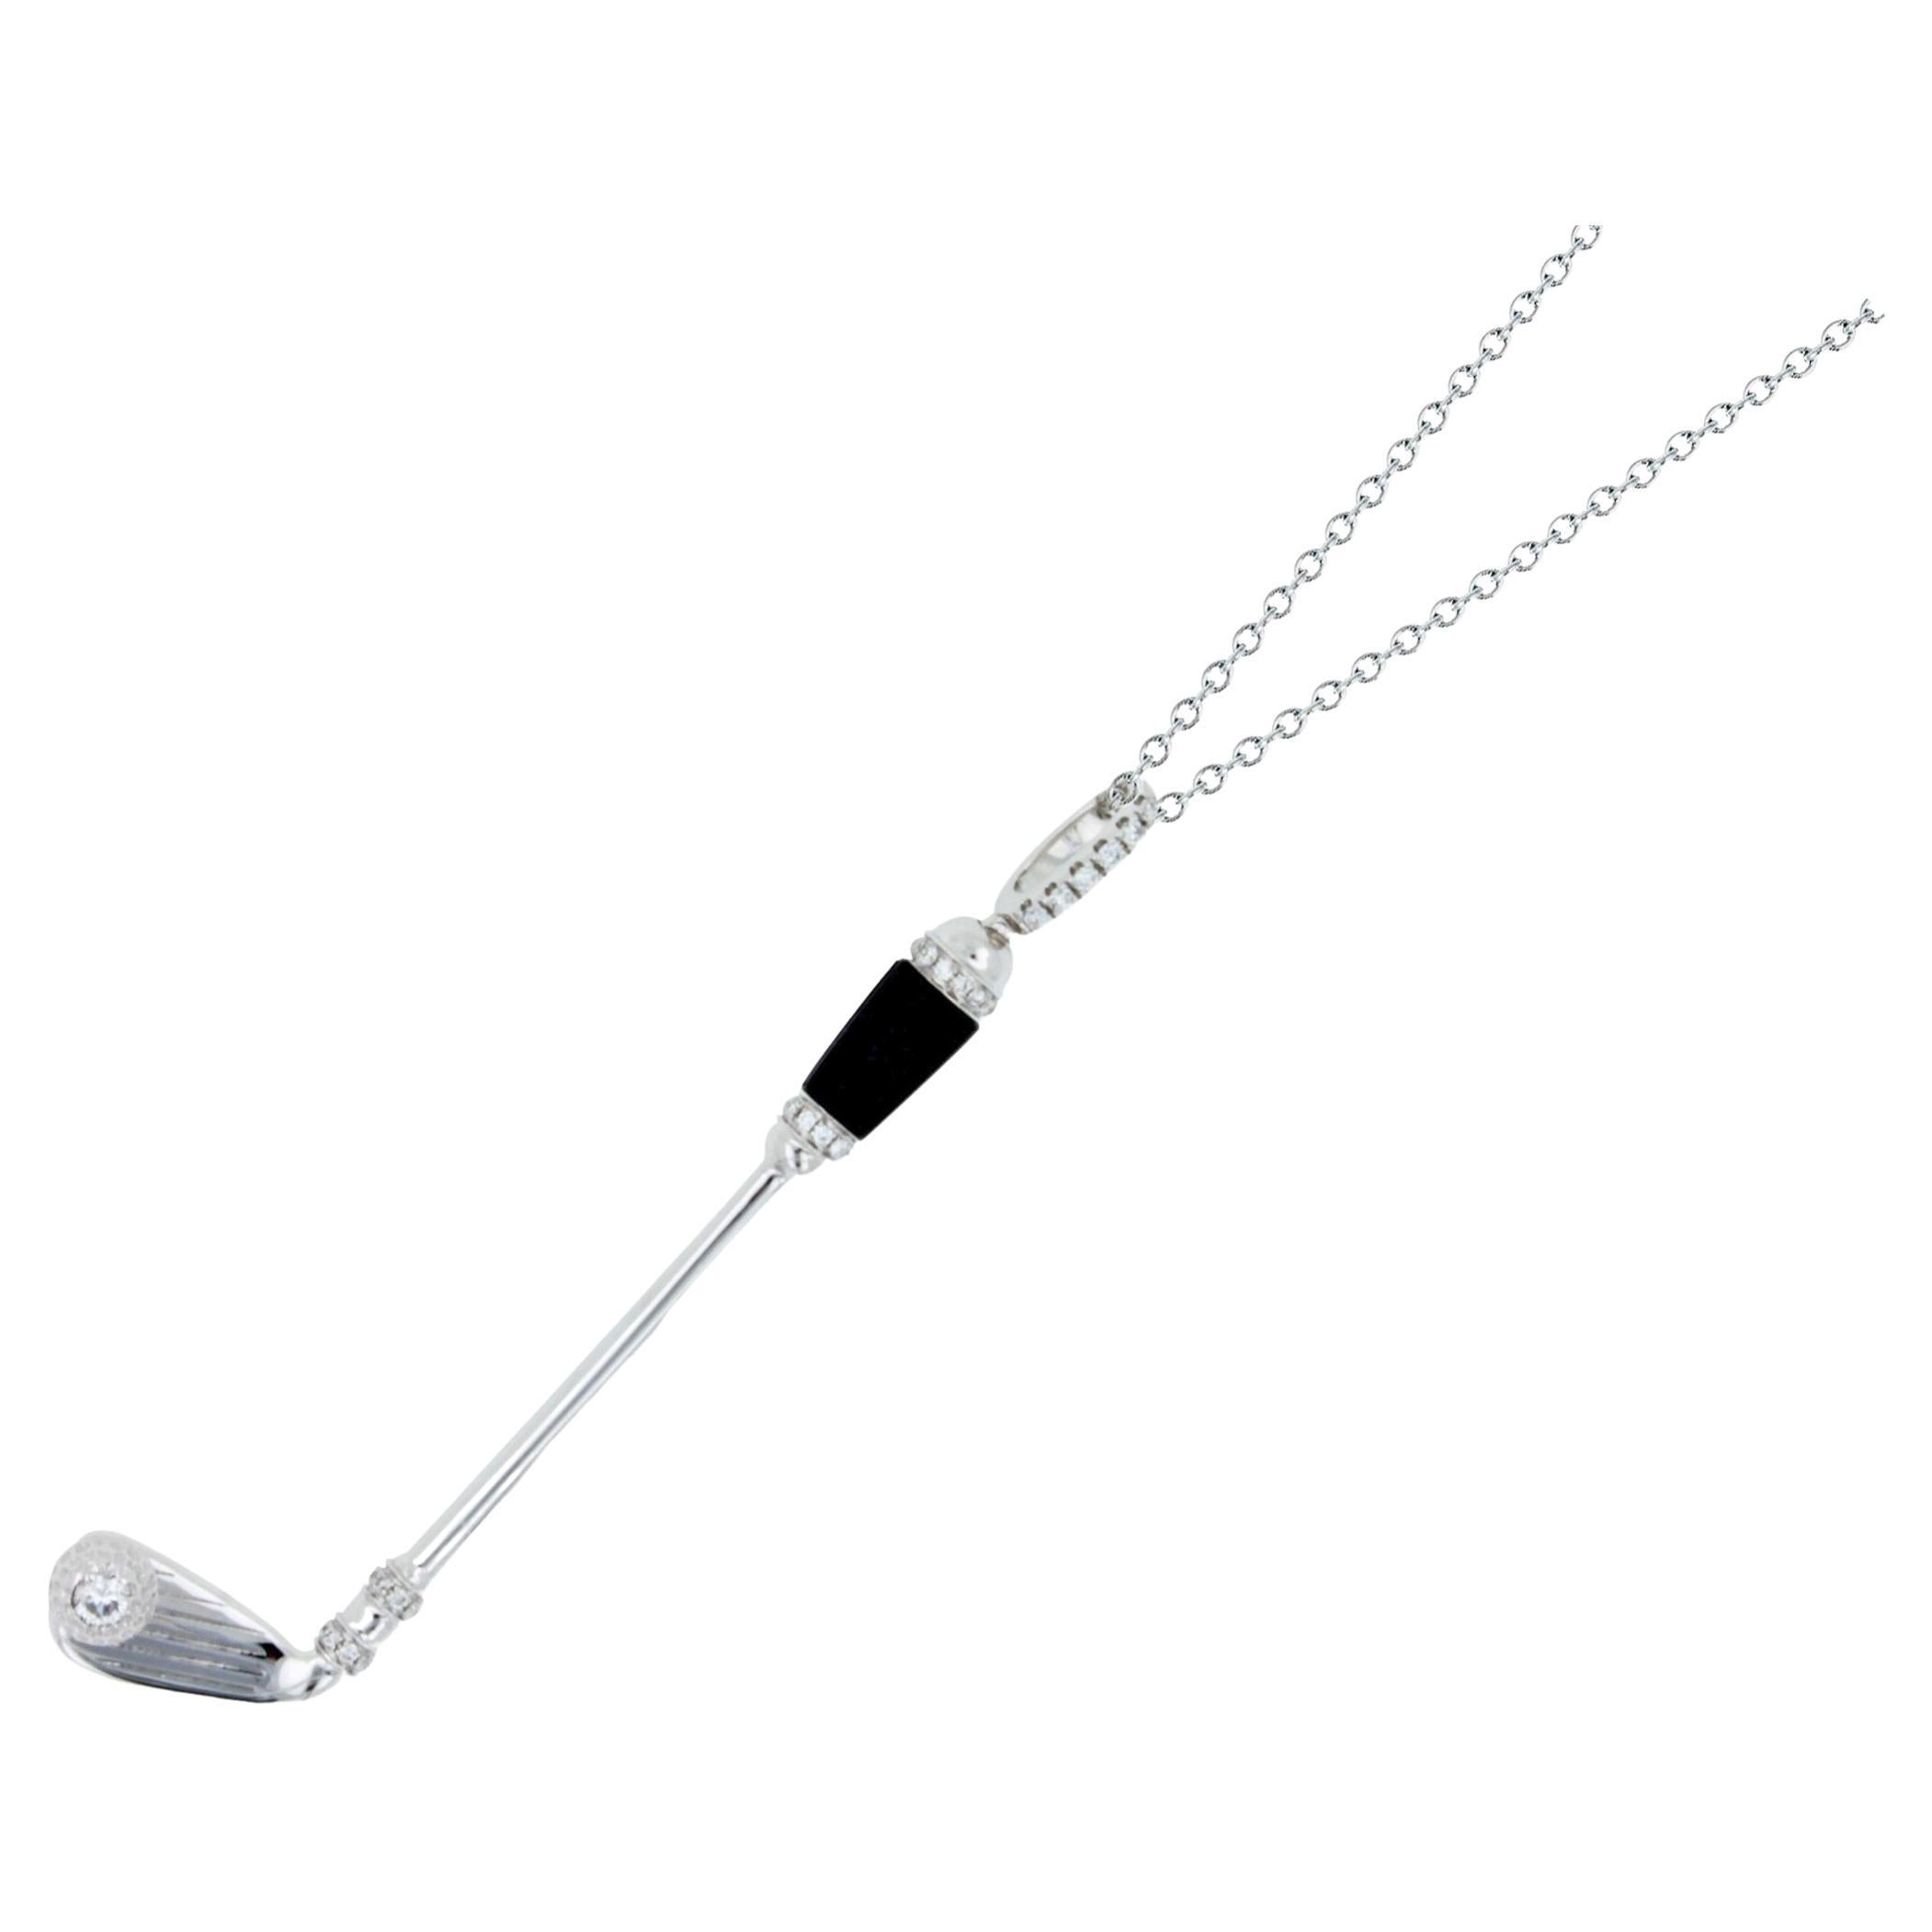 18K White Gold
Black Onyx Gemstone Handle
White Diamond Golf Ball Gemstone
0.30 cts Diamonds
16-18 inches Diamond-Cut Link Cable chain length
In-Stock
This is part of Galt & Bro. Jewelry's exclusive, custom made-to-order Golf Club Birdies